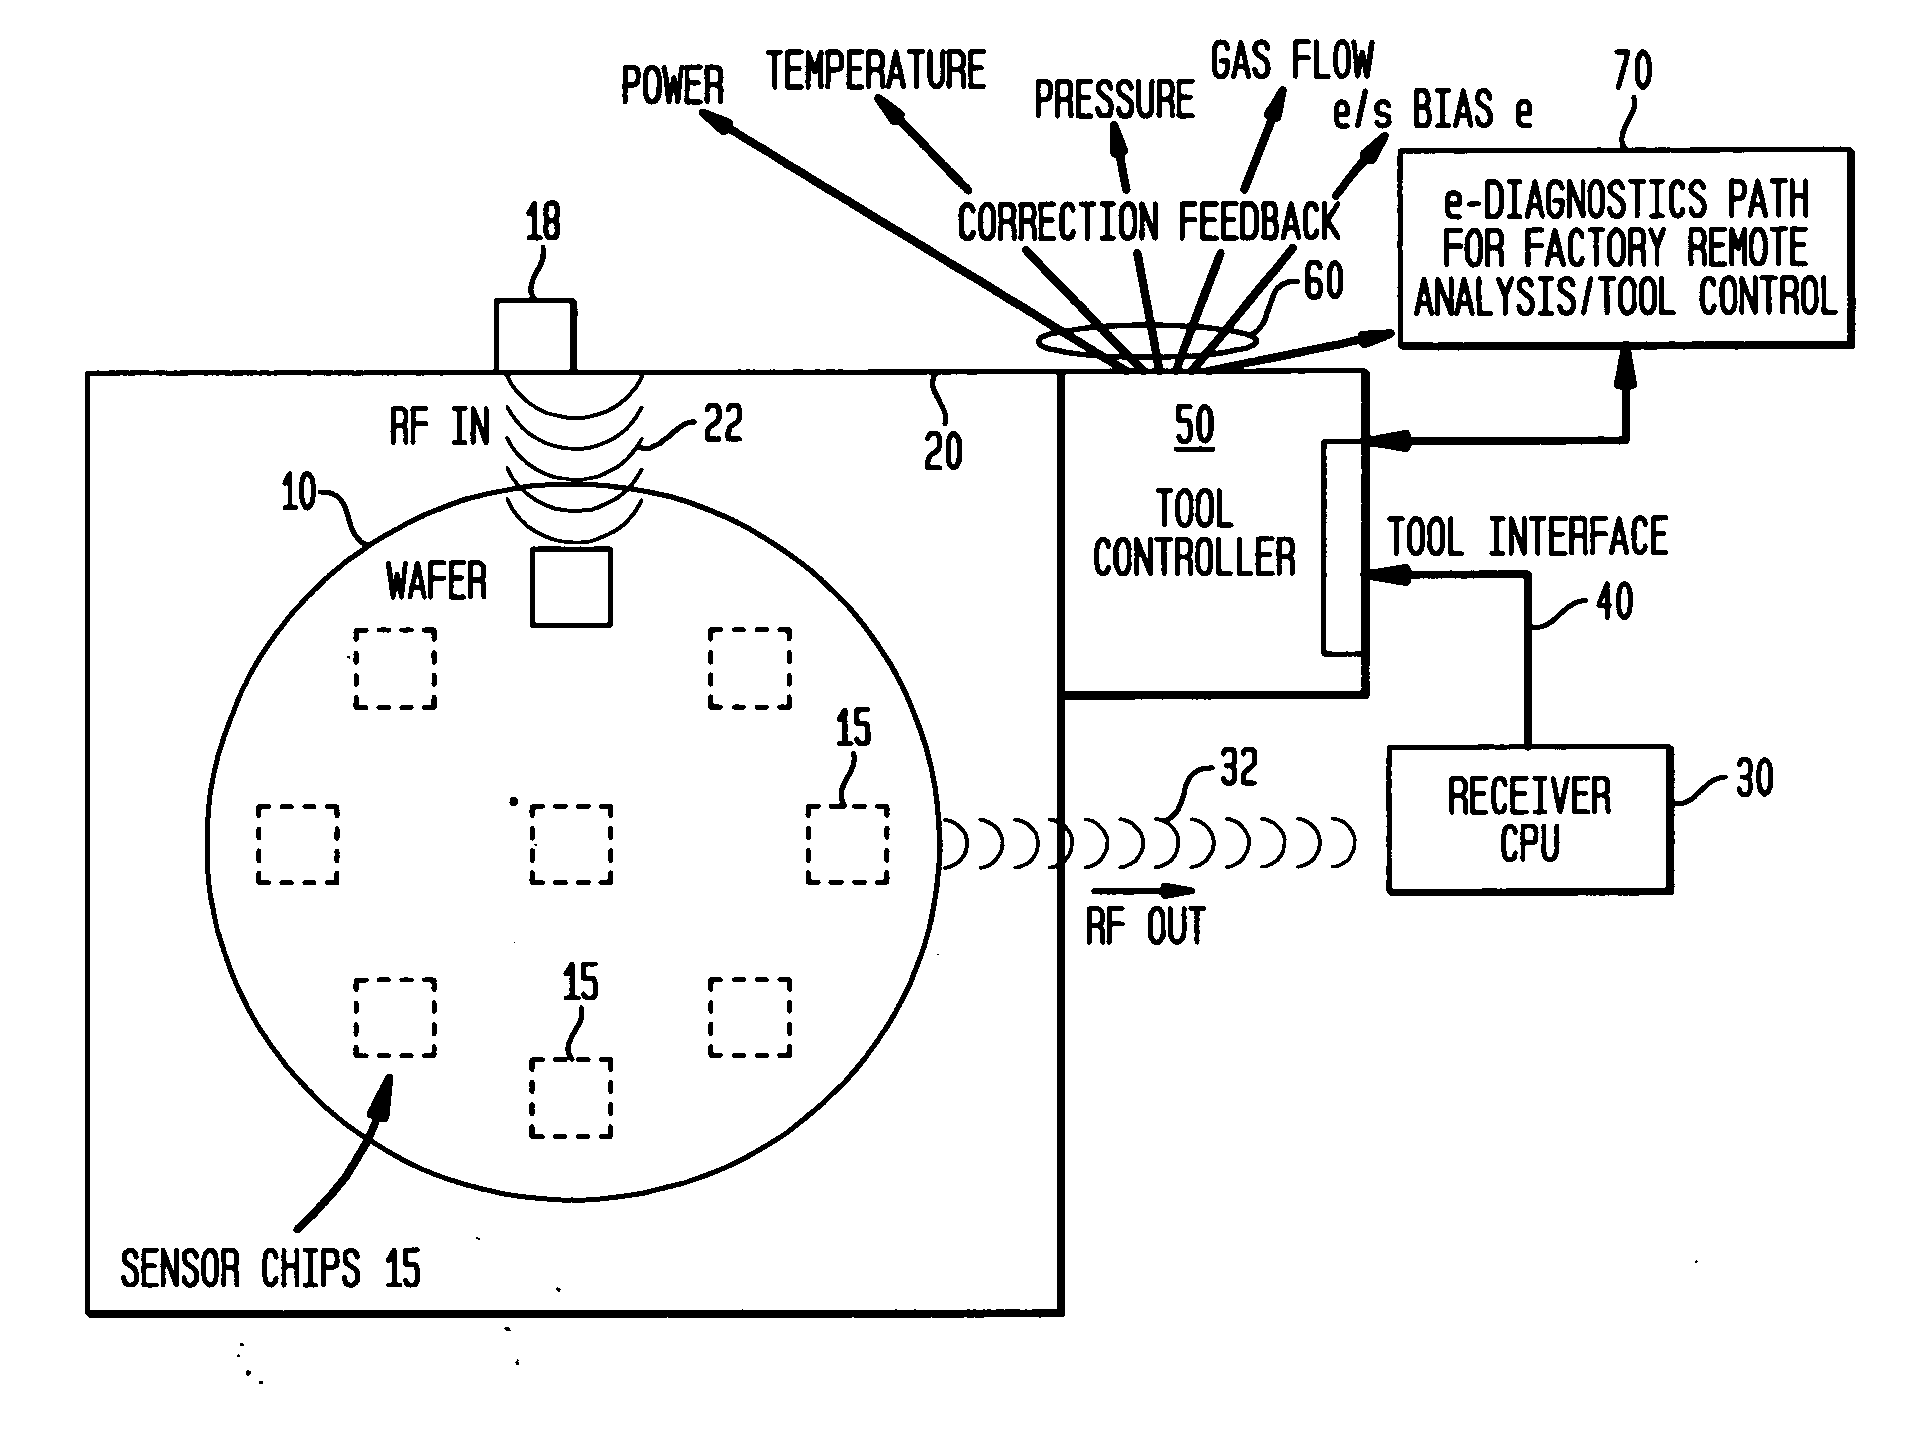 Single ic-chip design on wafer with an embedded sensor utilizing RF capabilities to enable real-time data transmission